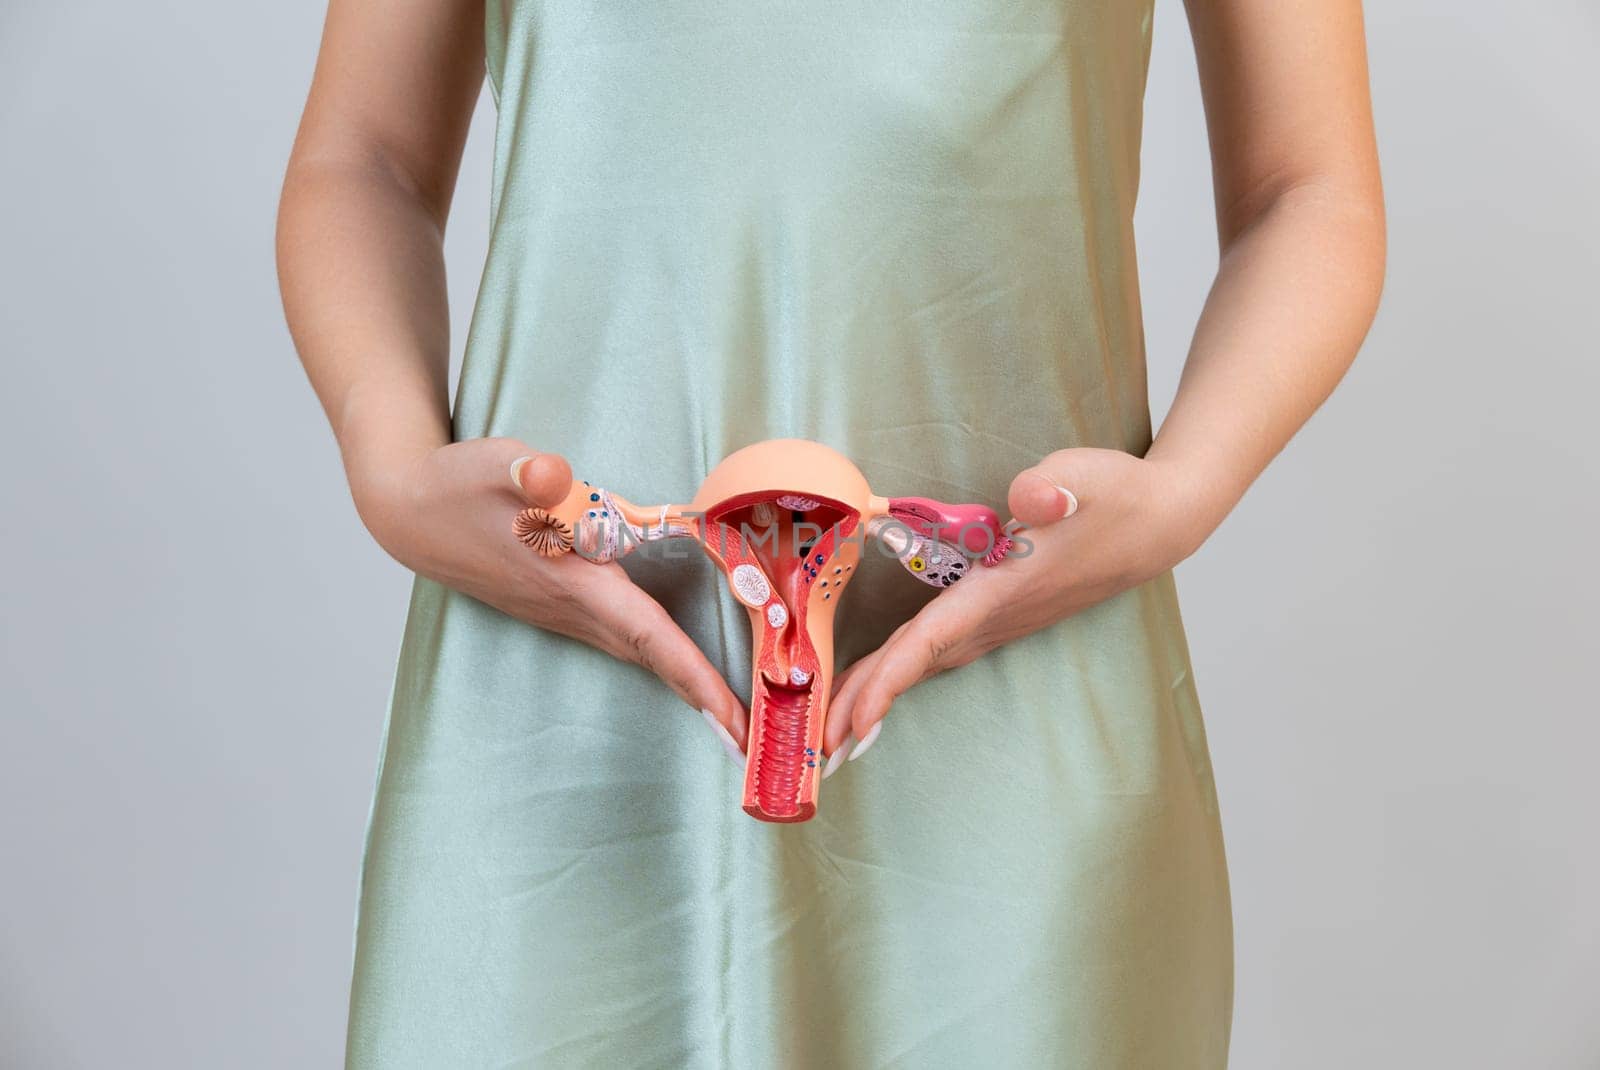 Asain woman holds model of female reproductive system in the hands. Help and care concept by zartarn